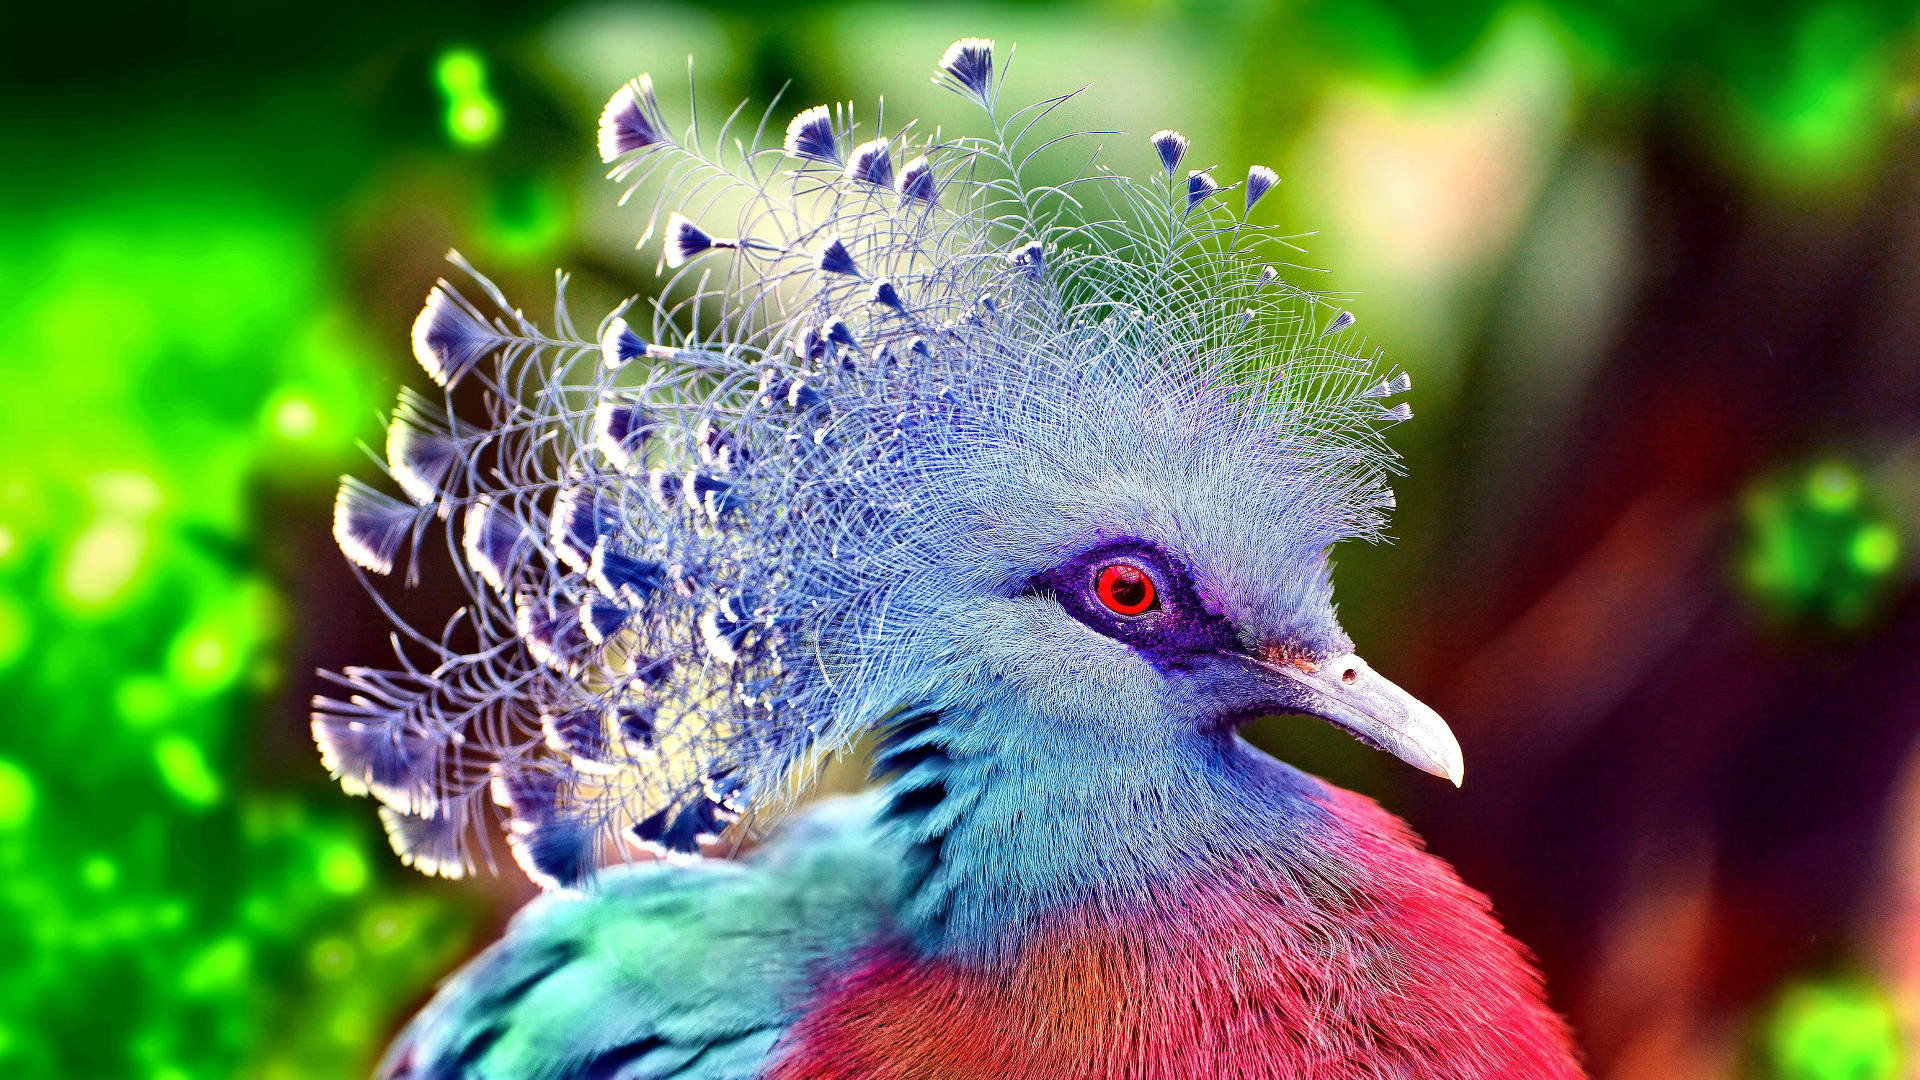 Download Most Beautiful Hd Victoria Crowned Pigeon Wallpaper | Wallpapers .com